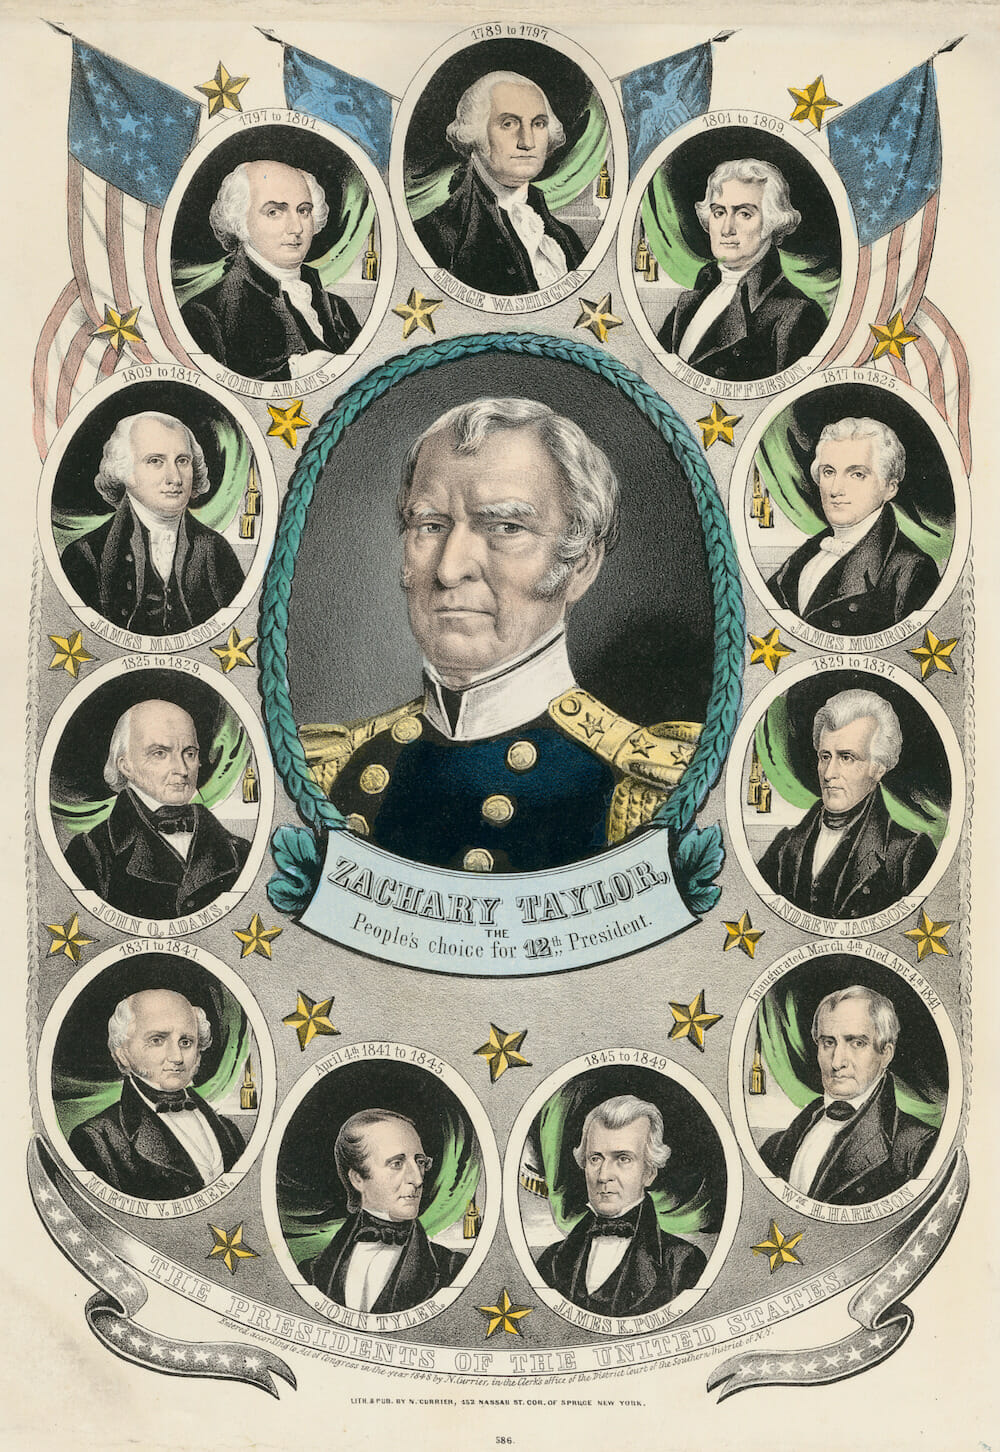 “People's Choice Twelfth President” features a portrait of President Zachary Taylor at the center, surrounded by the previous 11 presidents, all illustrated as white men with white hair except one, John Tyler, shown with black hair.